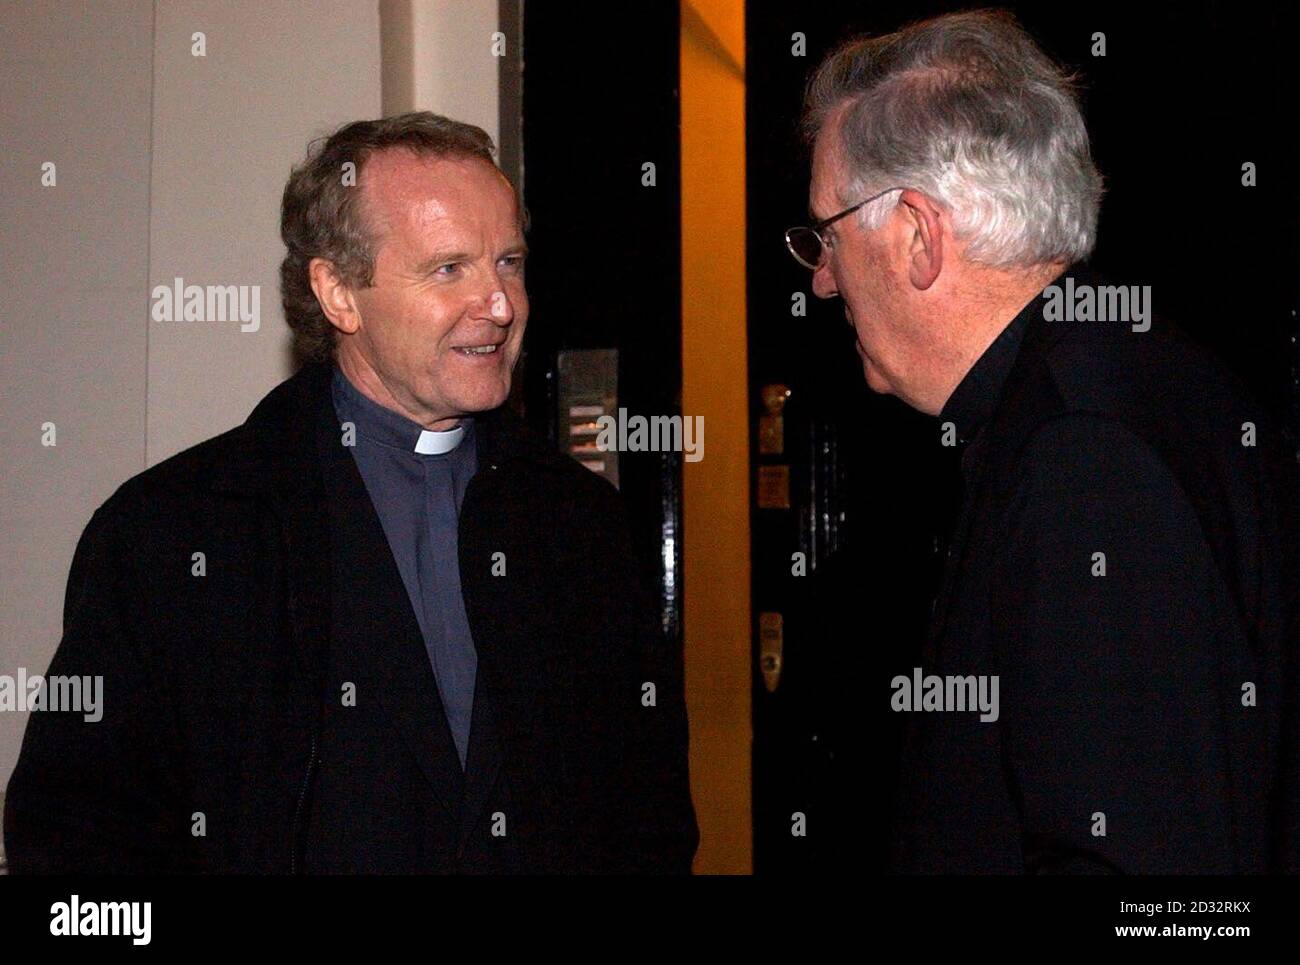 Cardinal Cormac Murphy O'Connor, the Archbishop of Westminster and leader of the Catholic church in England and Wales (right) arrives at the Catholic Bishops' Conference Centre in London with Kieran Conroy, the Bishop of Arundel and Brighton.  *   They were appearing at a press briefing to answer detailed questions about allegations dating back to the early 1990s of child abuse by priests in Arundel and Brighton, which date back to the mid-1990s when the cardinal was the bishop of the diocese .  Stock Photo